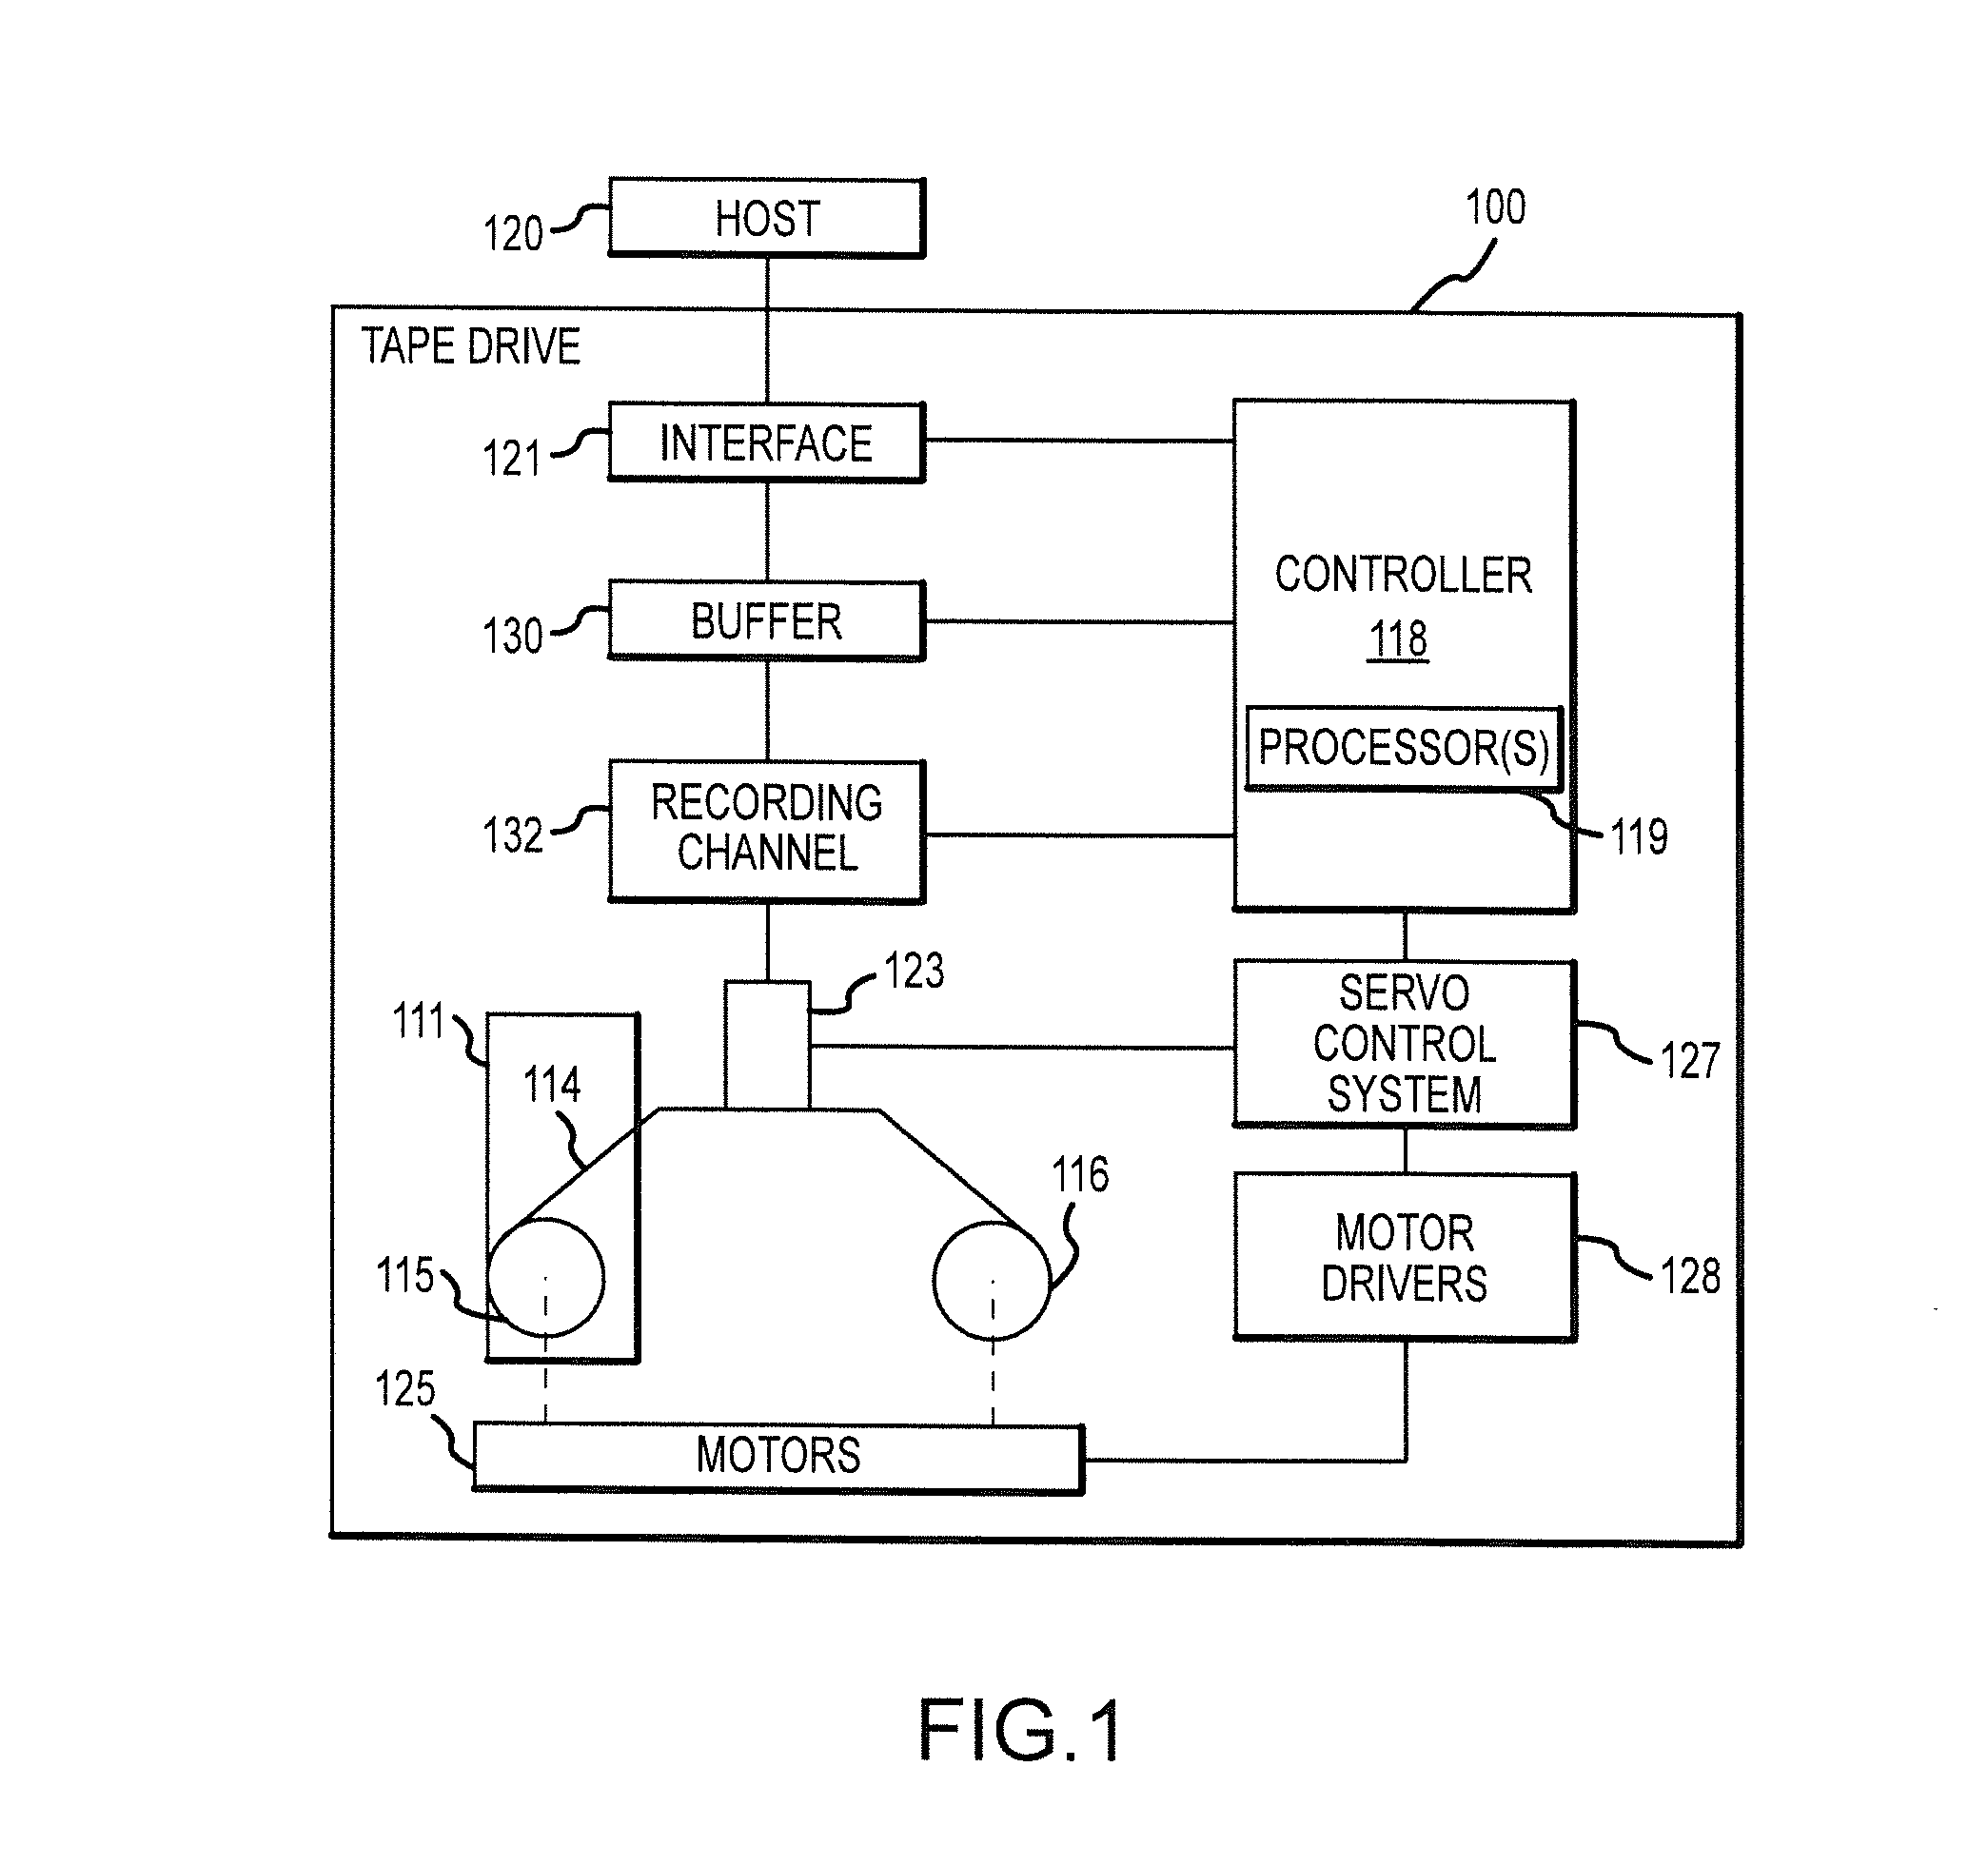 Target and initiator mode configuration of tape drives for data transfer between source and destination tape drives